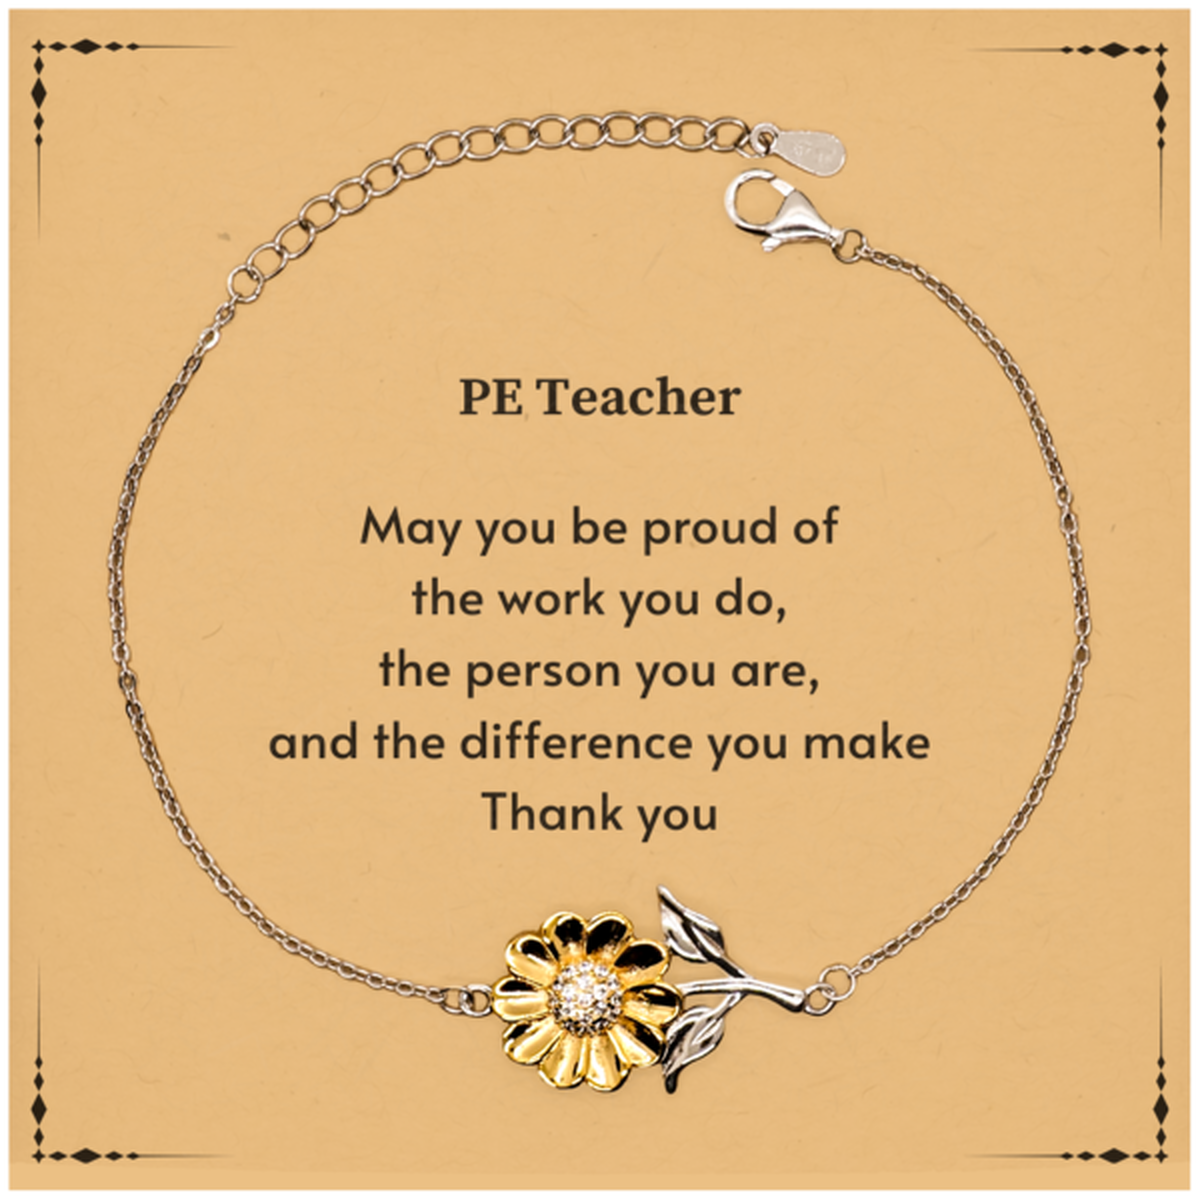 Heartwarming Sunflower Bracelet Retirement Coworkers Gifts for PE Teacher, PE Teacher May You be proud of the work you do, the person you are Gifts for Boss Men Women Friends